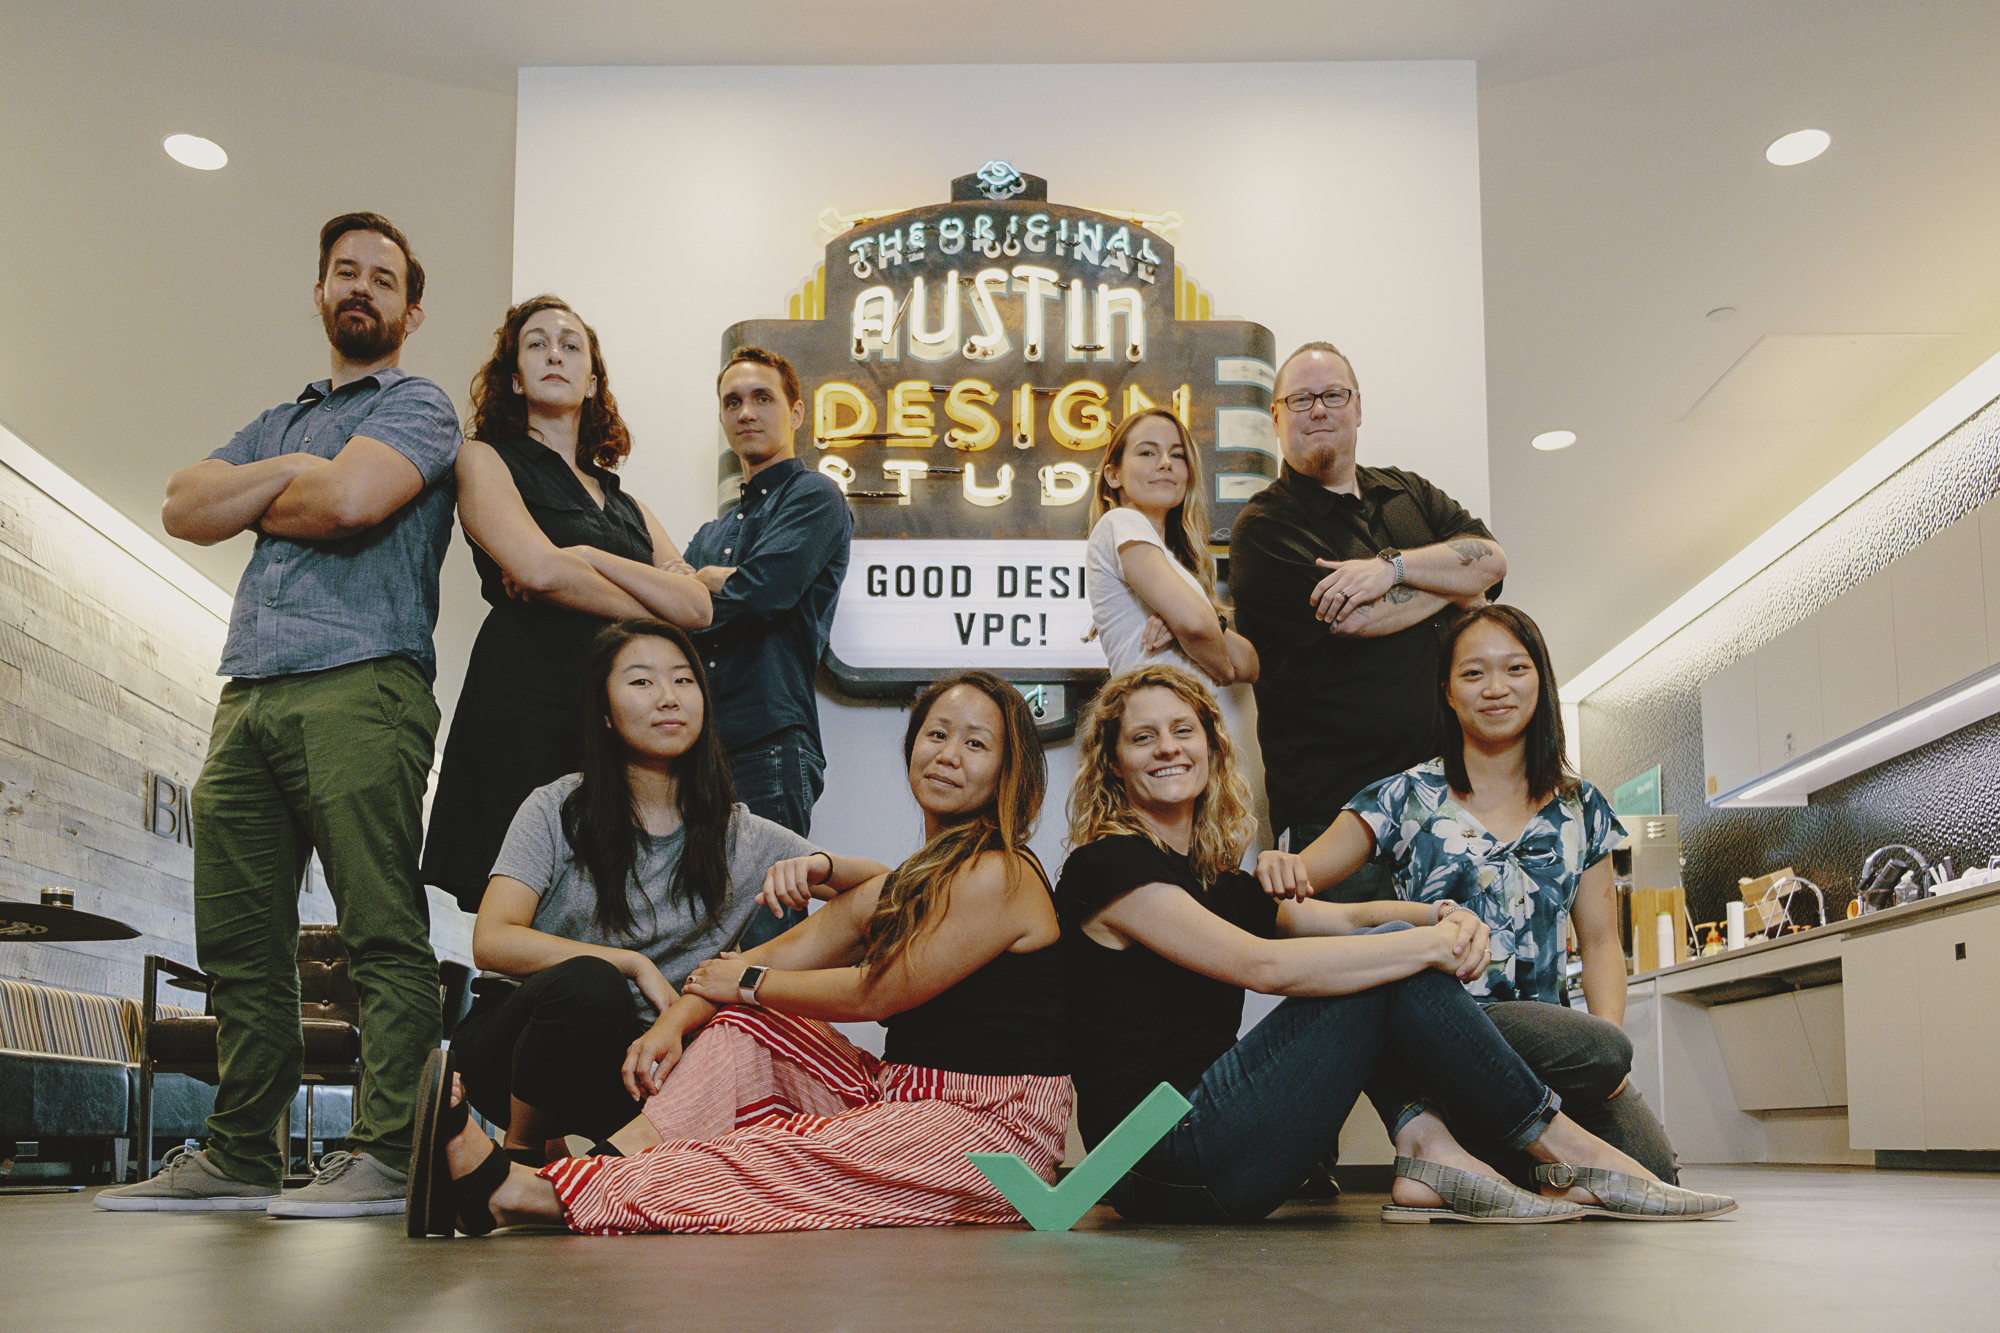 Picture of the design team posed together around a sign that says 'Good Design'